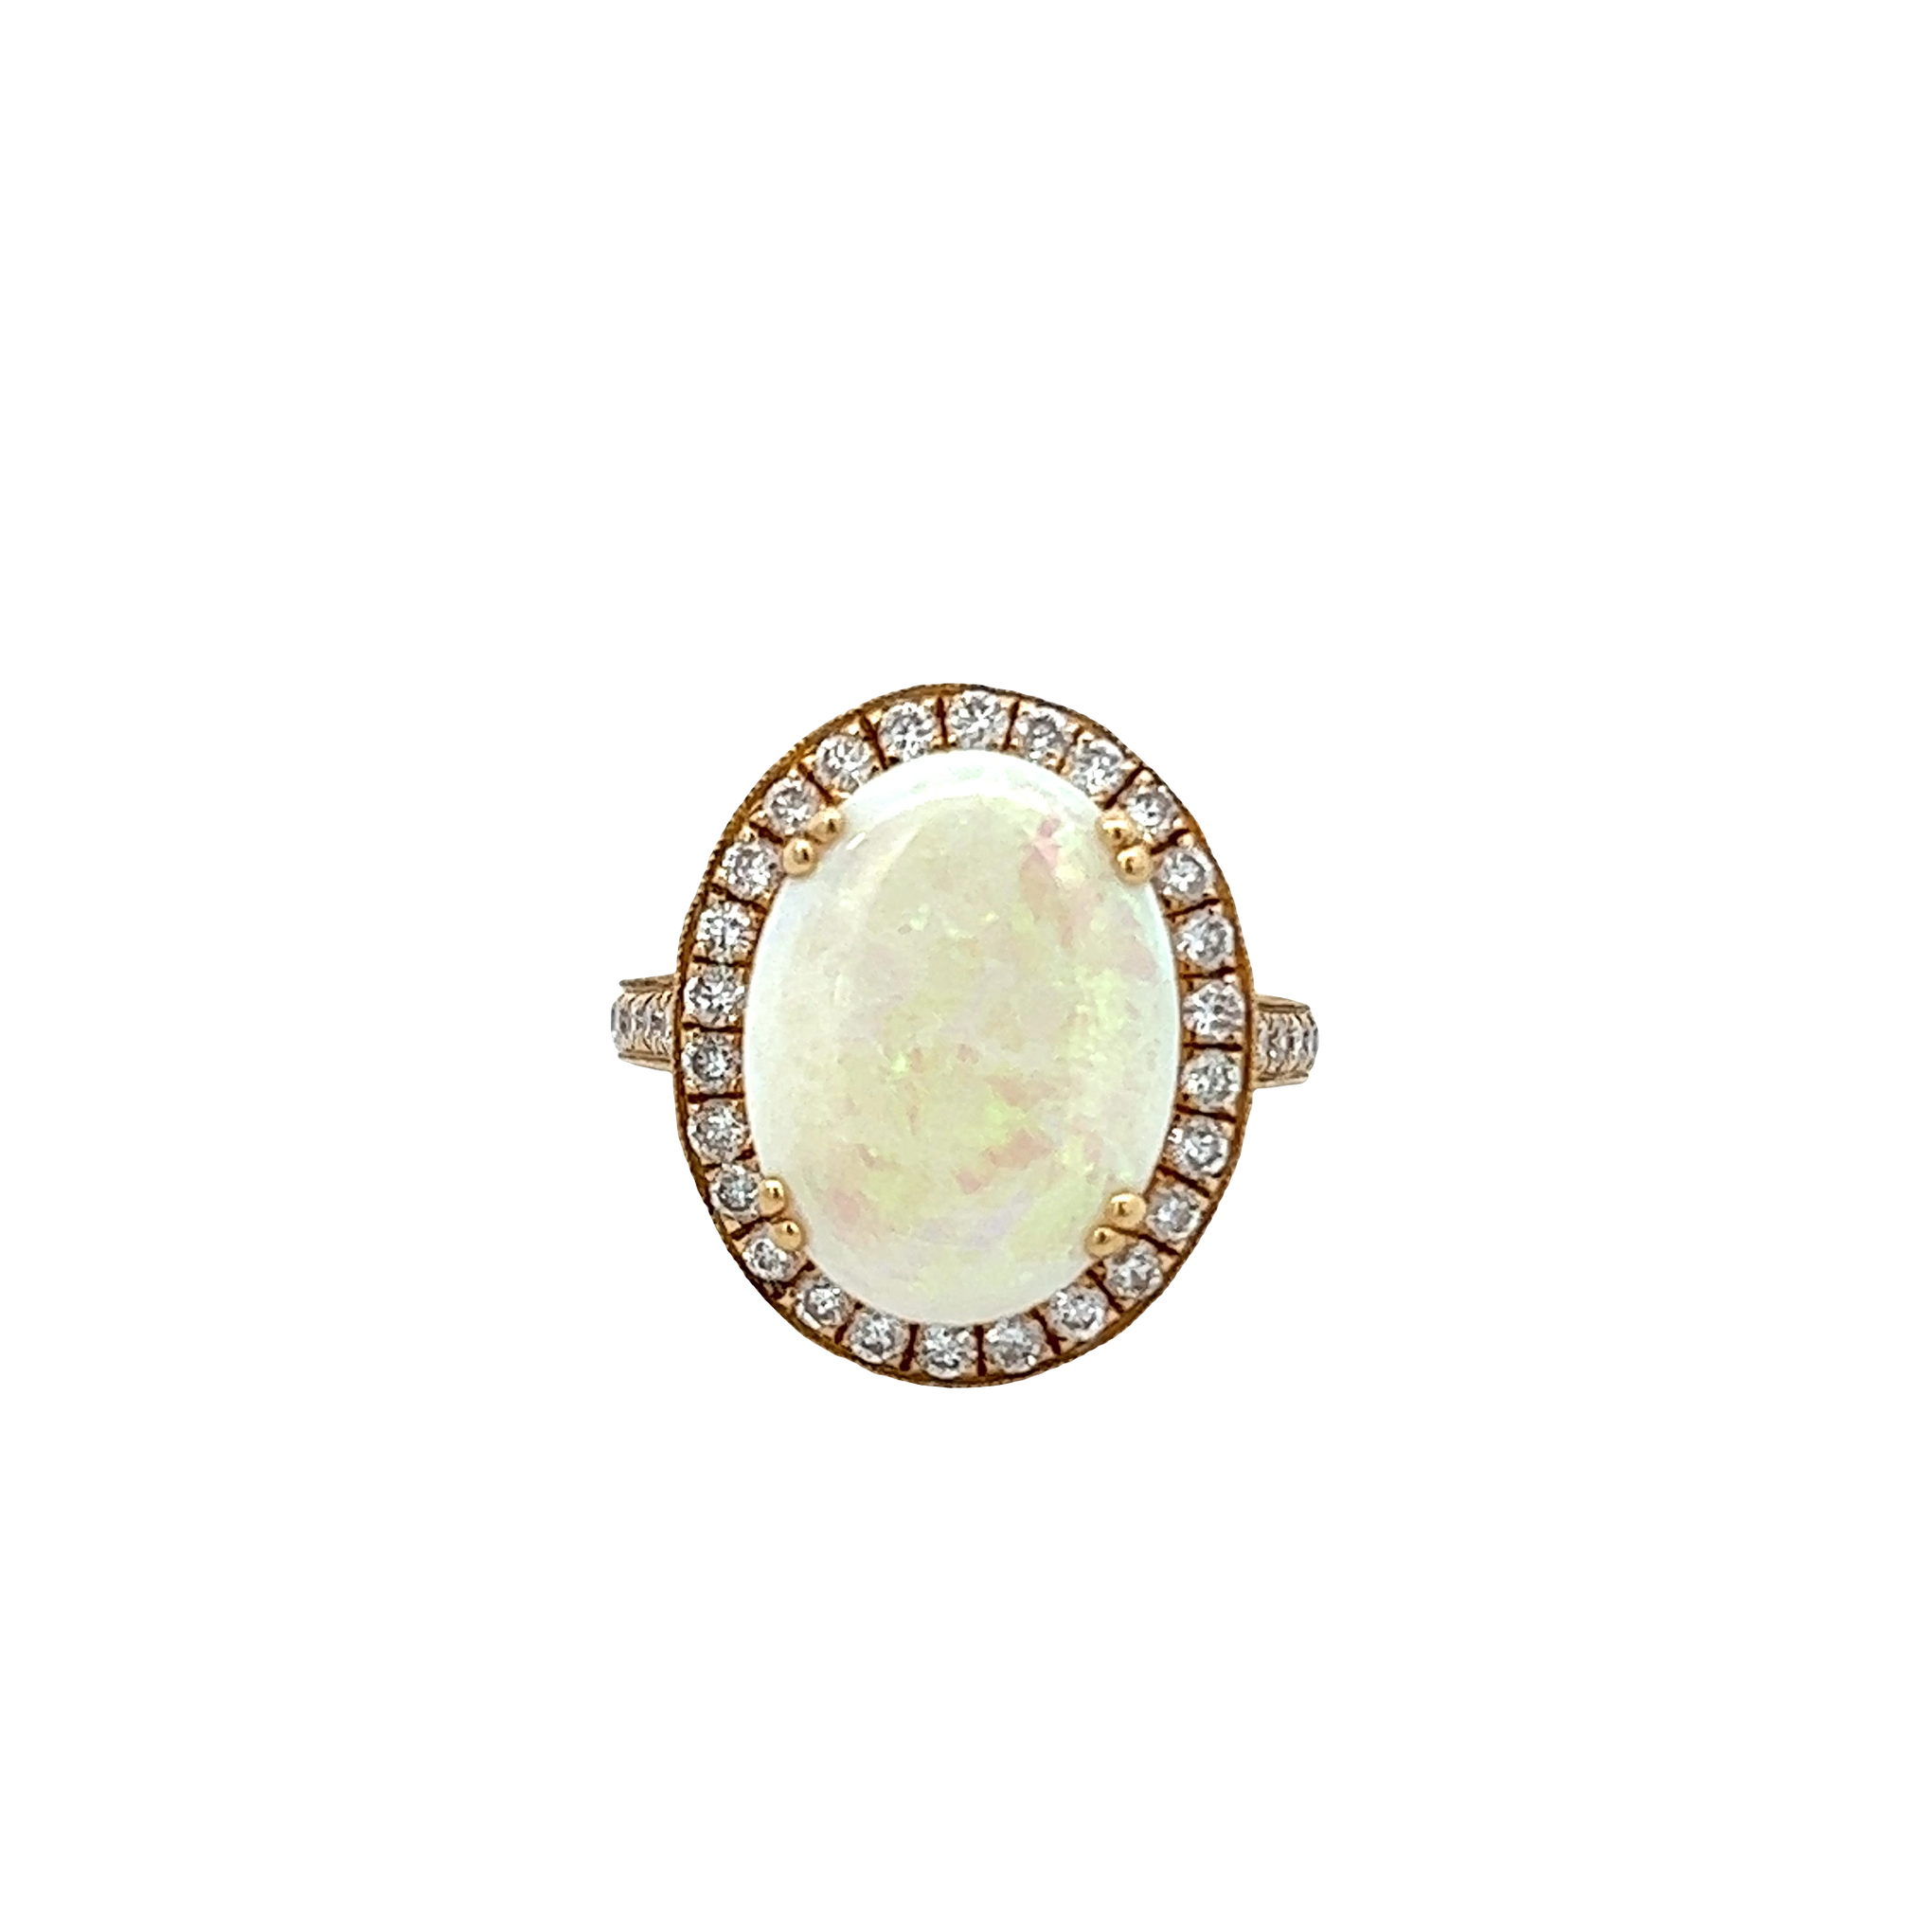 14KT Yellow Gold Round Cut Diamond And Opal Ring